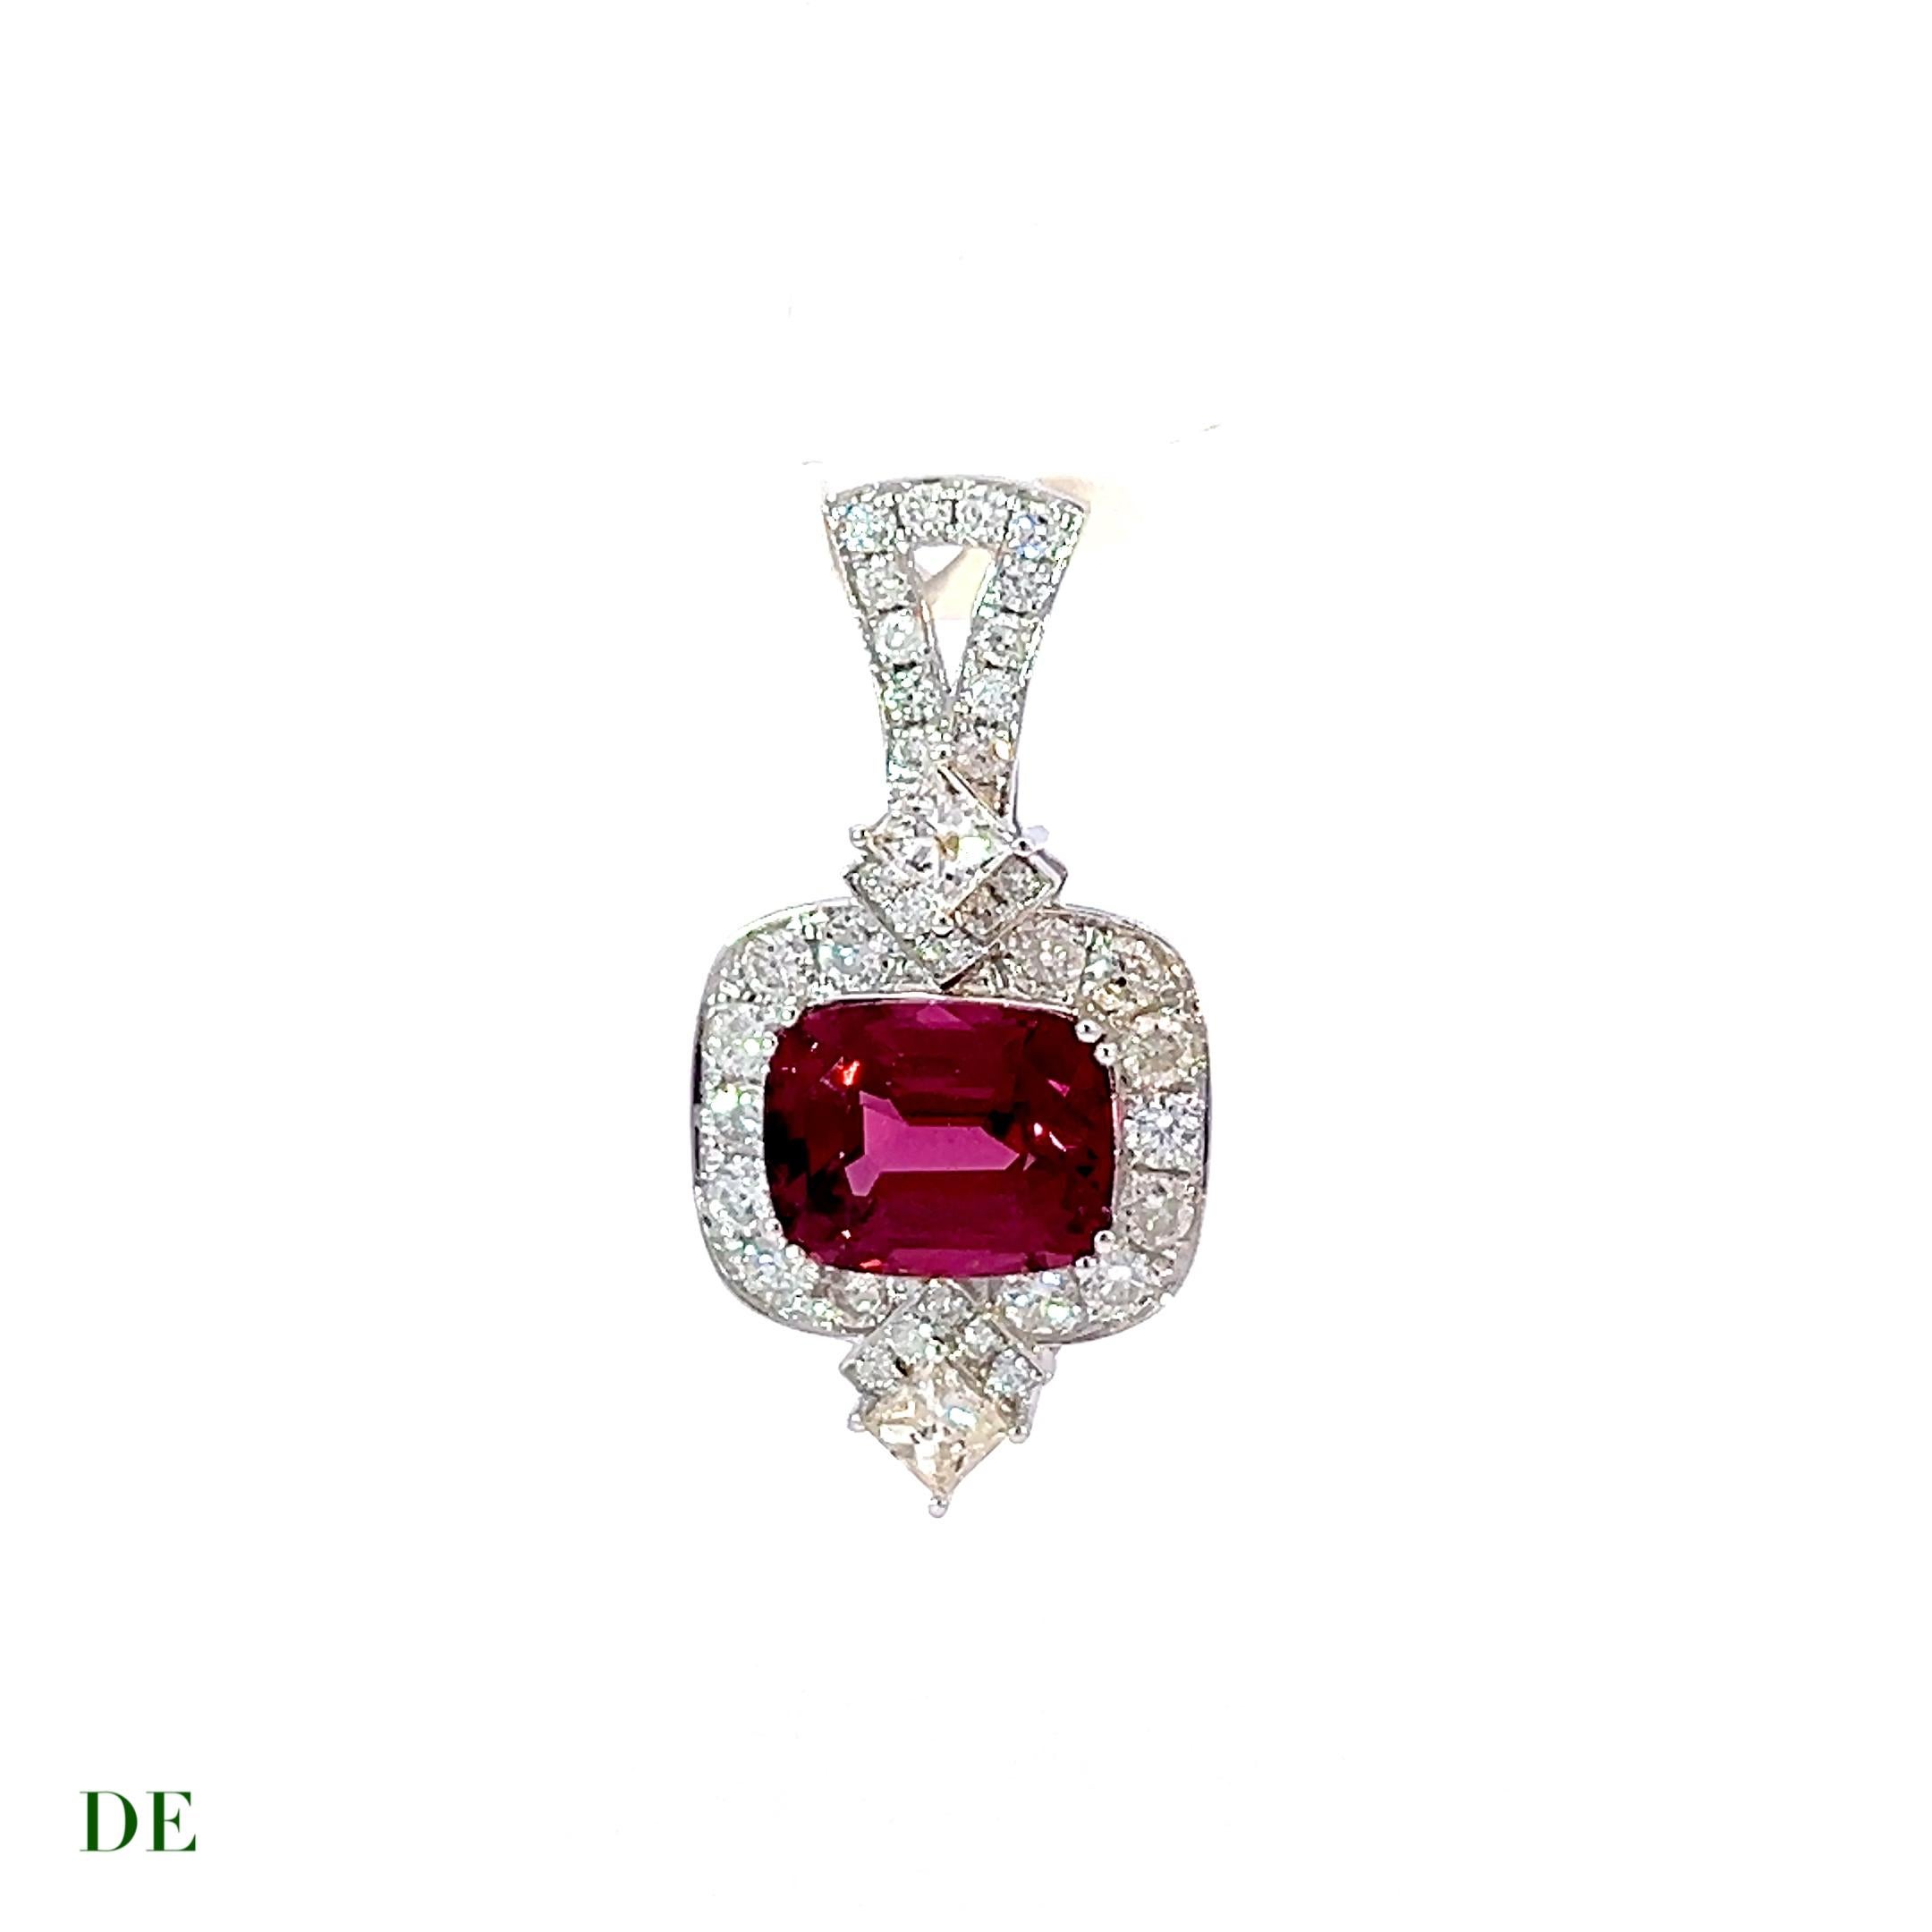 Women's or Men's Limited Classic 14k Gold 2.47 ct red burgundy tourmaline .76 ct Diamond Pendant For Sale